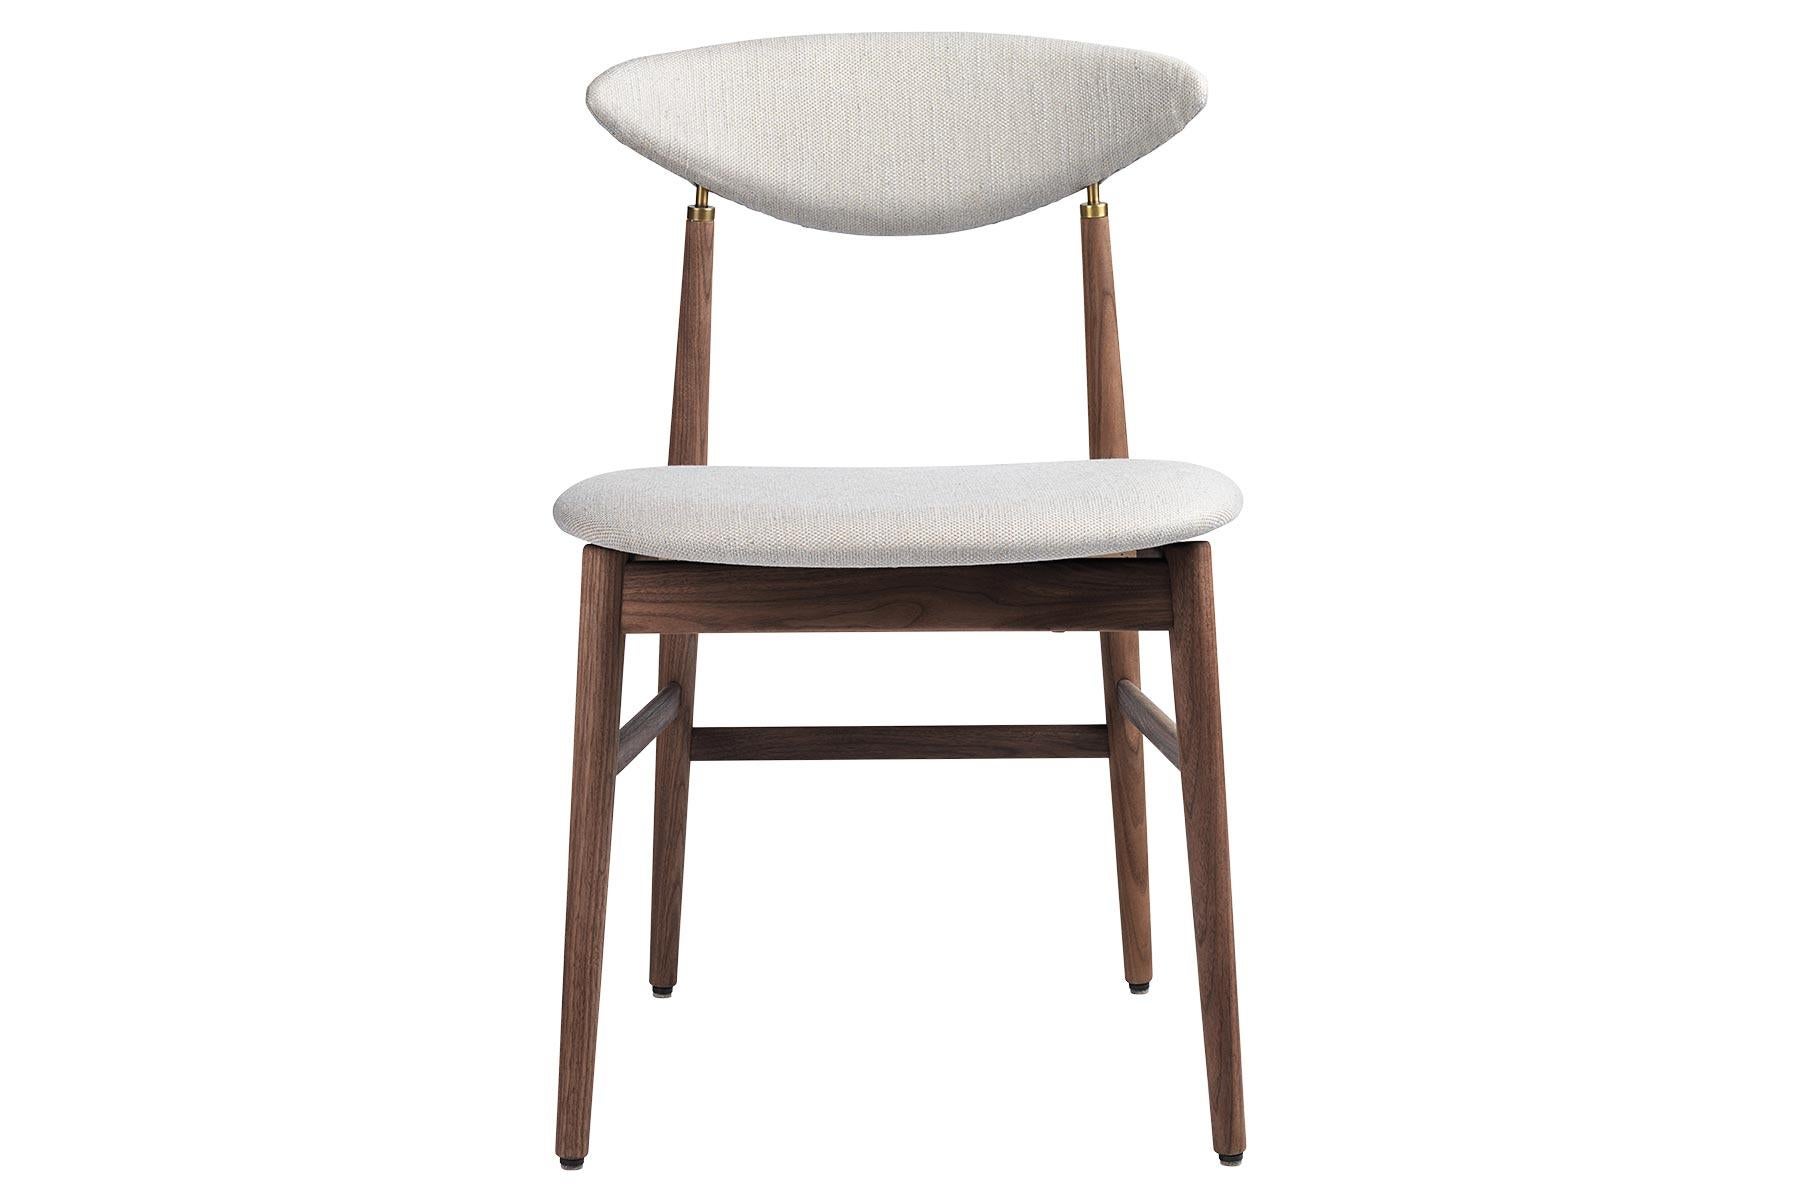 Designed by the design duo GamFratesi, the Gent dining chair is characterized by the contradiction between Scandinavian elegance and Italian dynamic lines. Strongly connected to the Masculo Chair, the new Gent dining chair is characterized by a